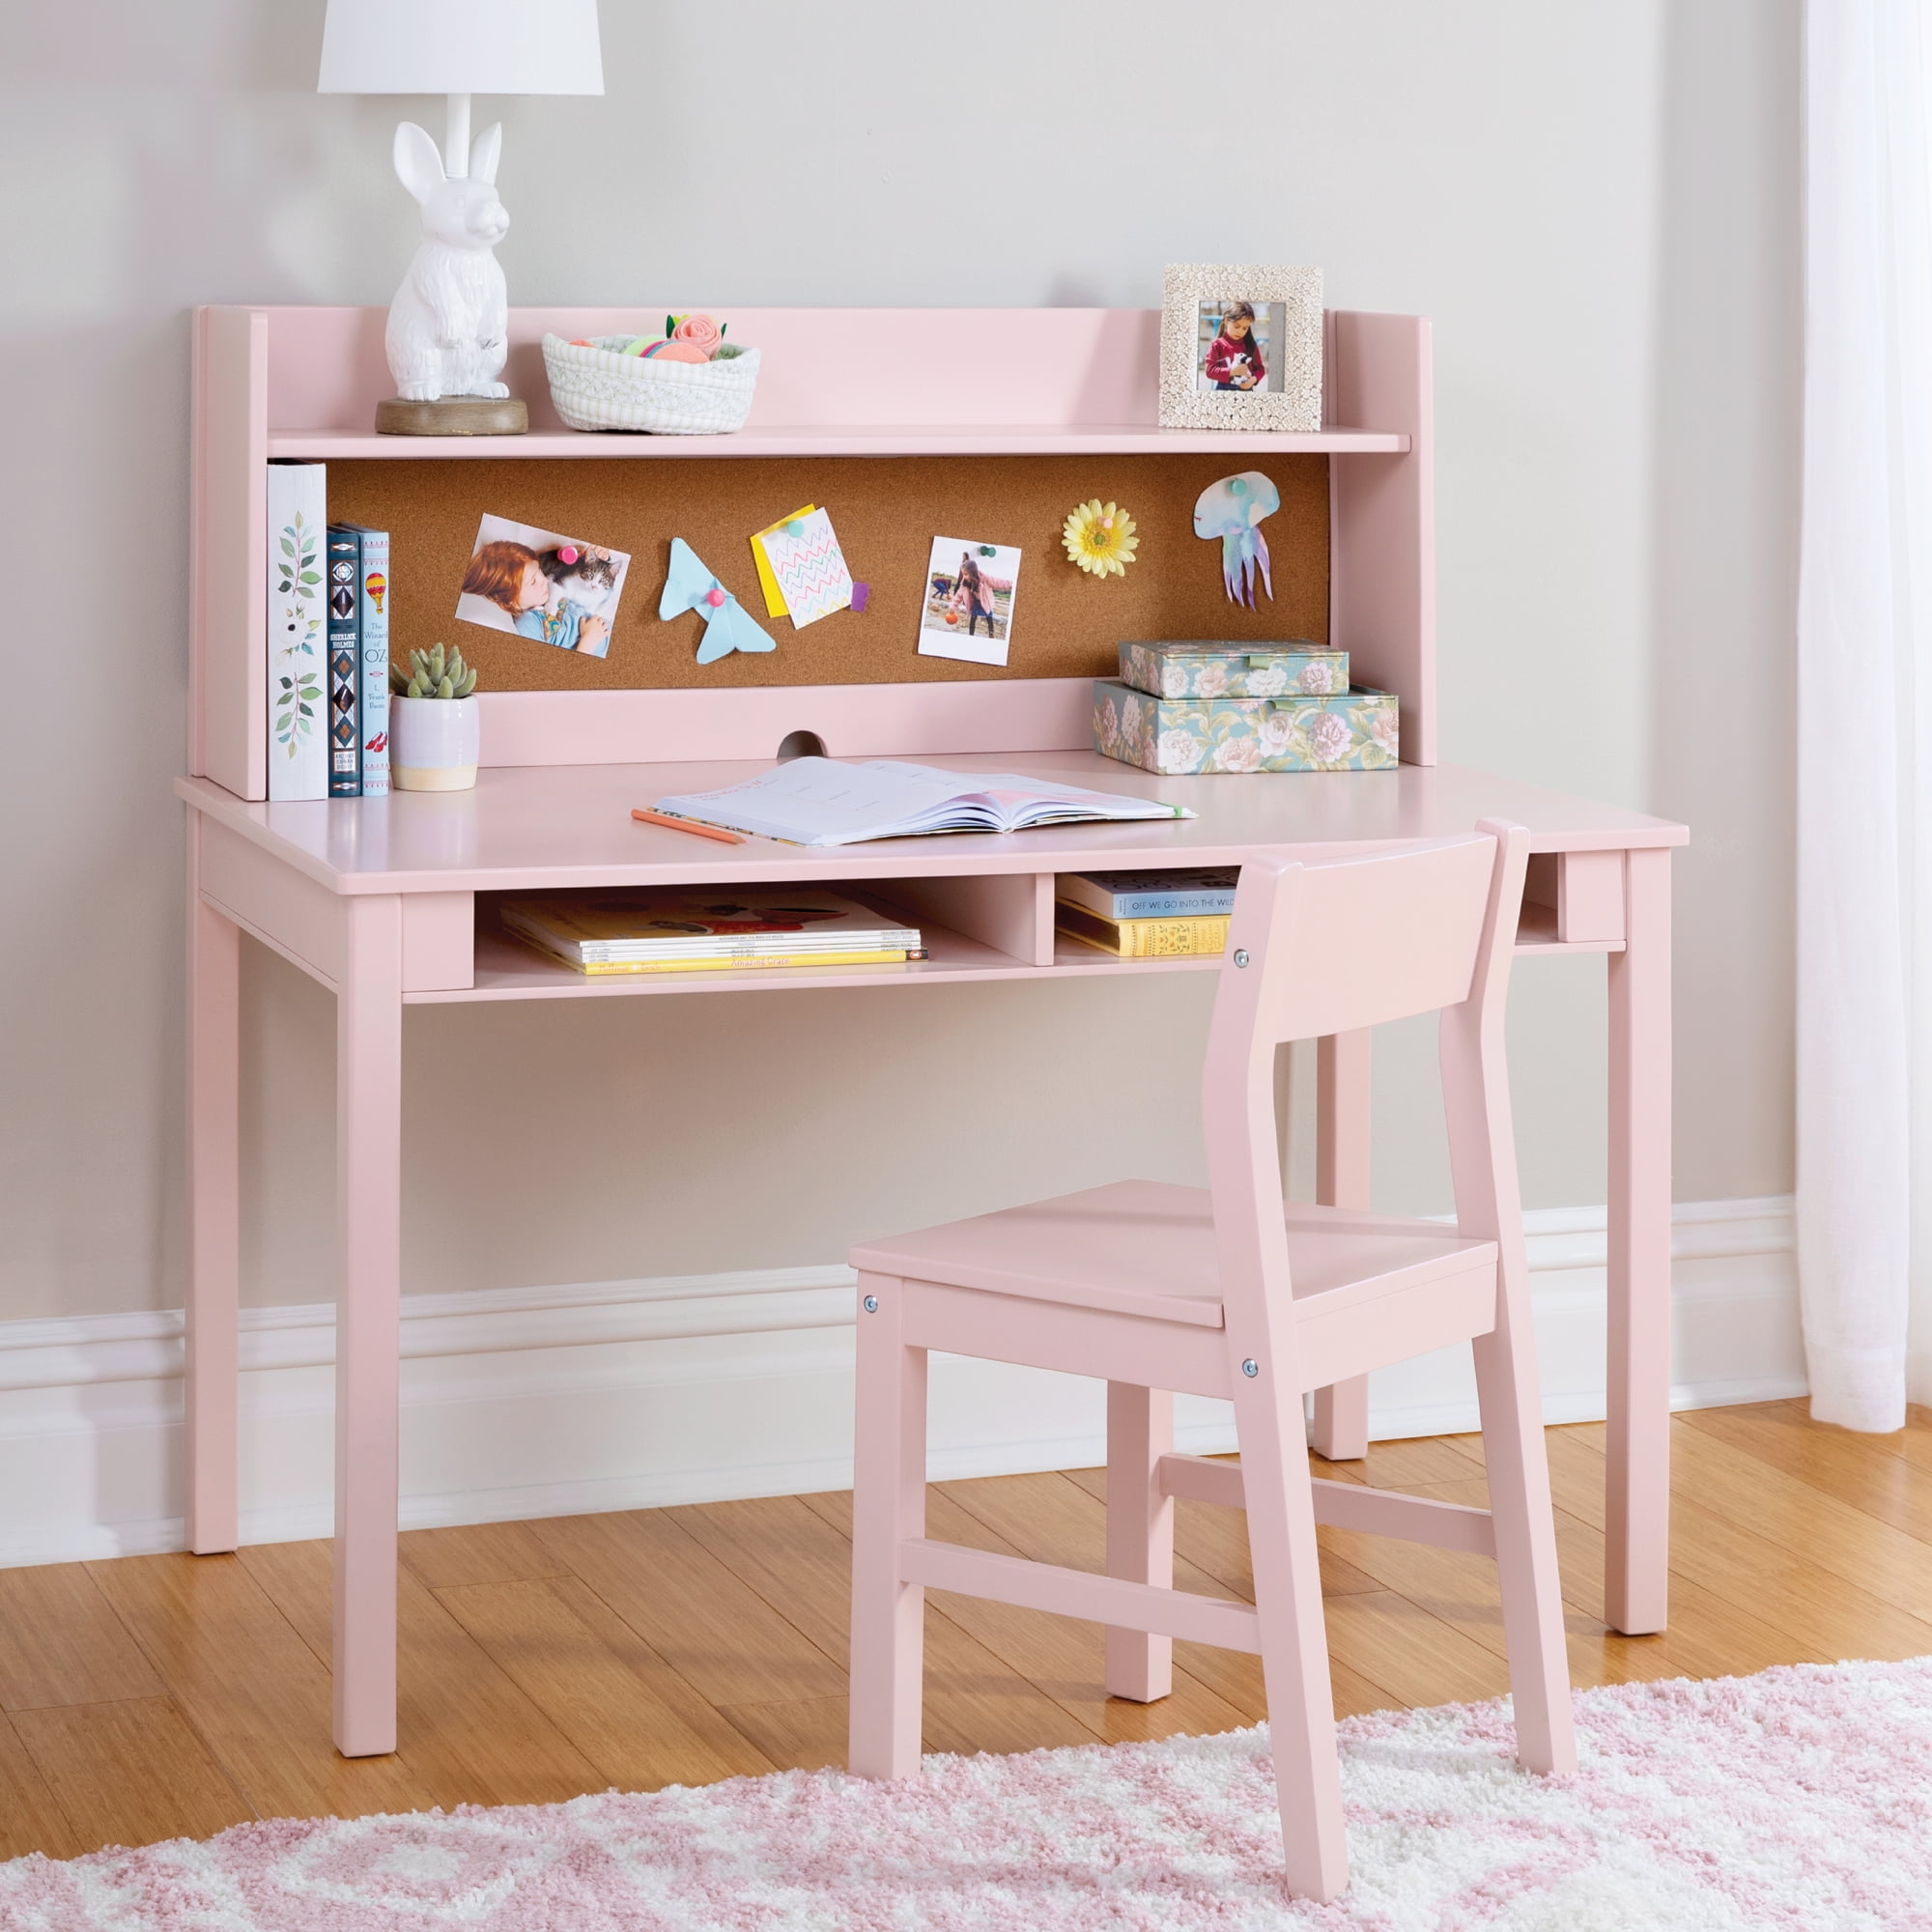 22 Kids Desk Ideas - Study Tables and Chairs for Kidse